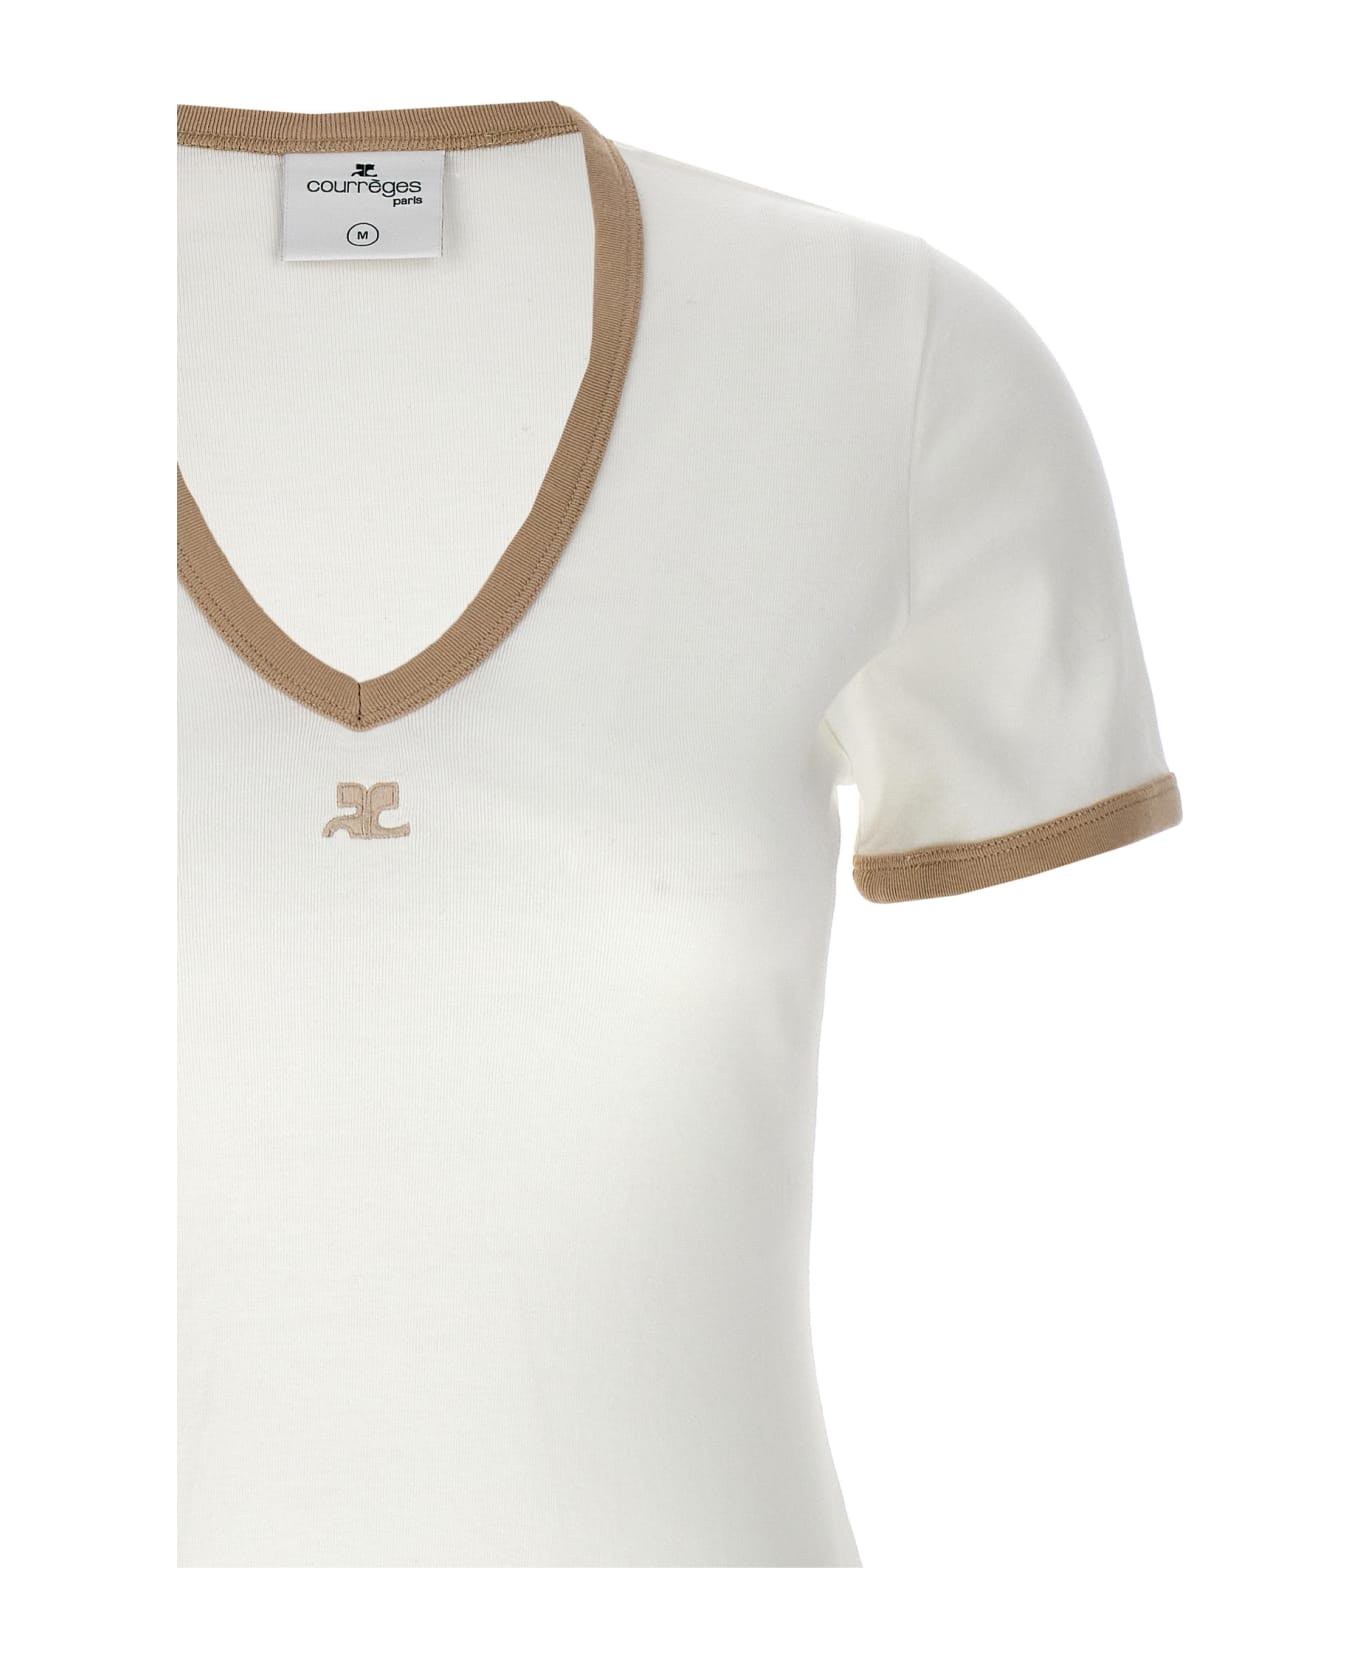 Courrèges Logo Embroidery Dress - White Tシャツ